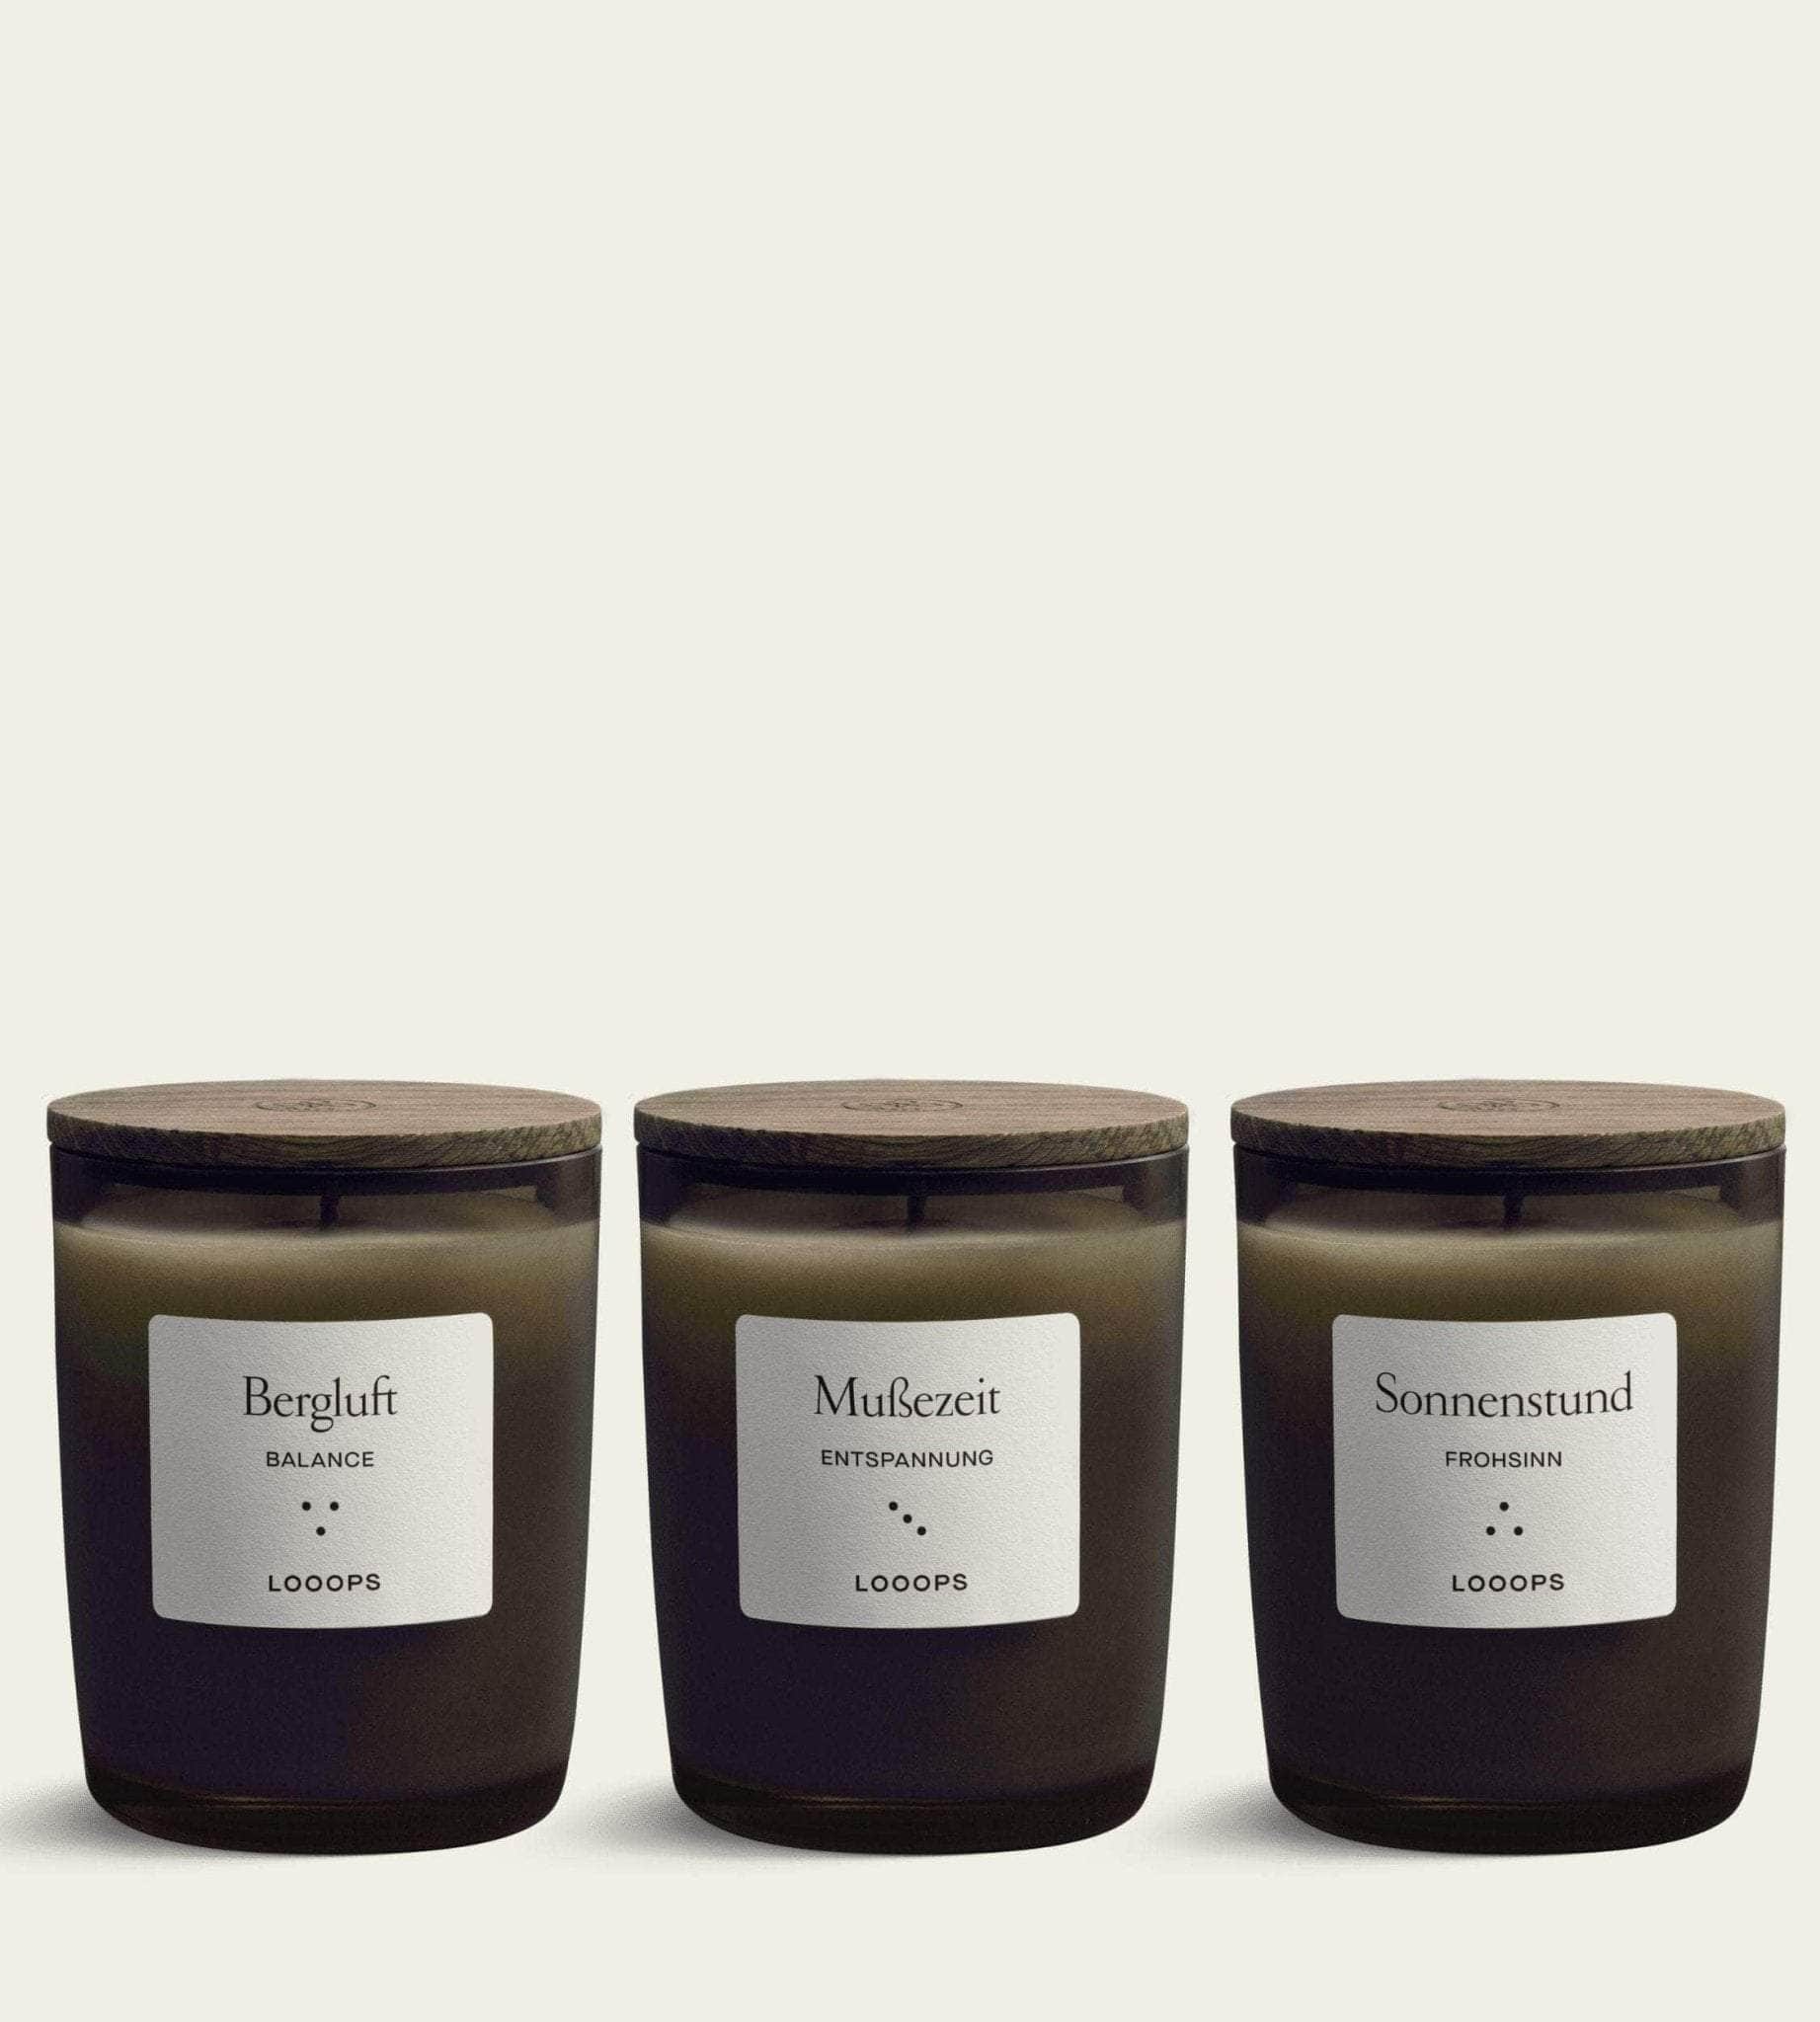 Looops Gift Box "Classic" – Set of 3 scented candles